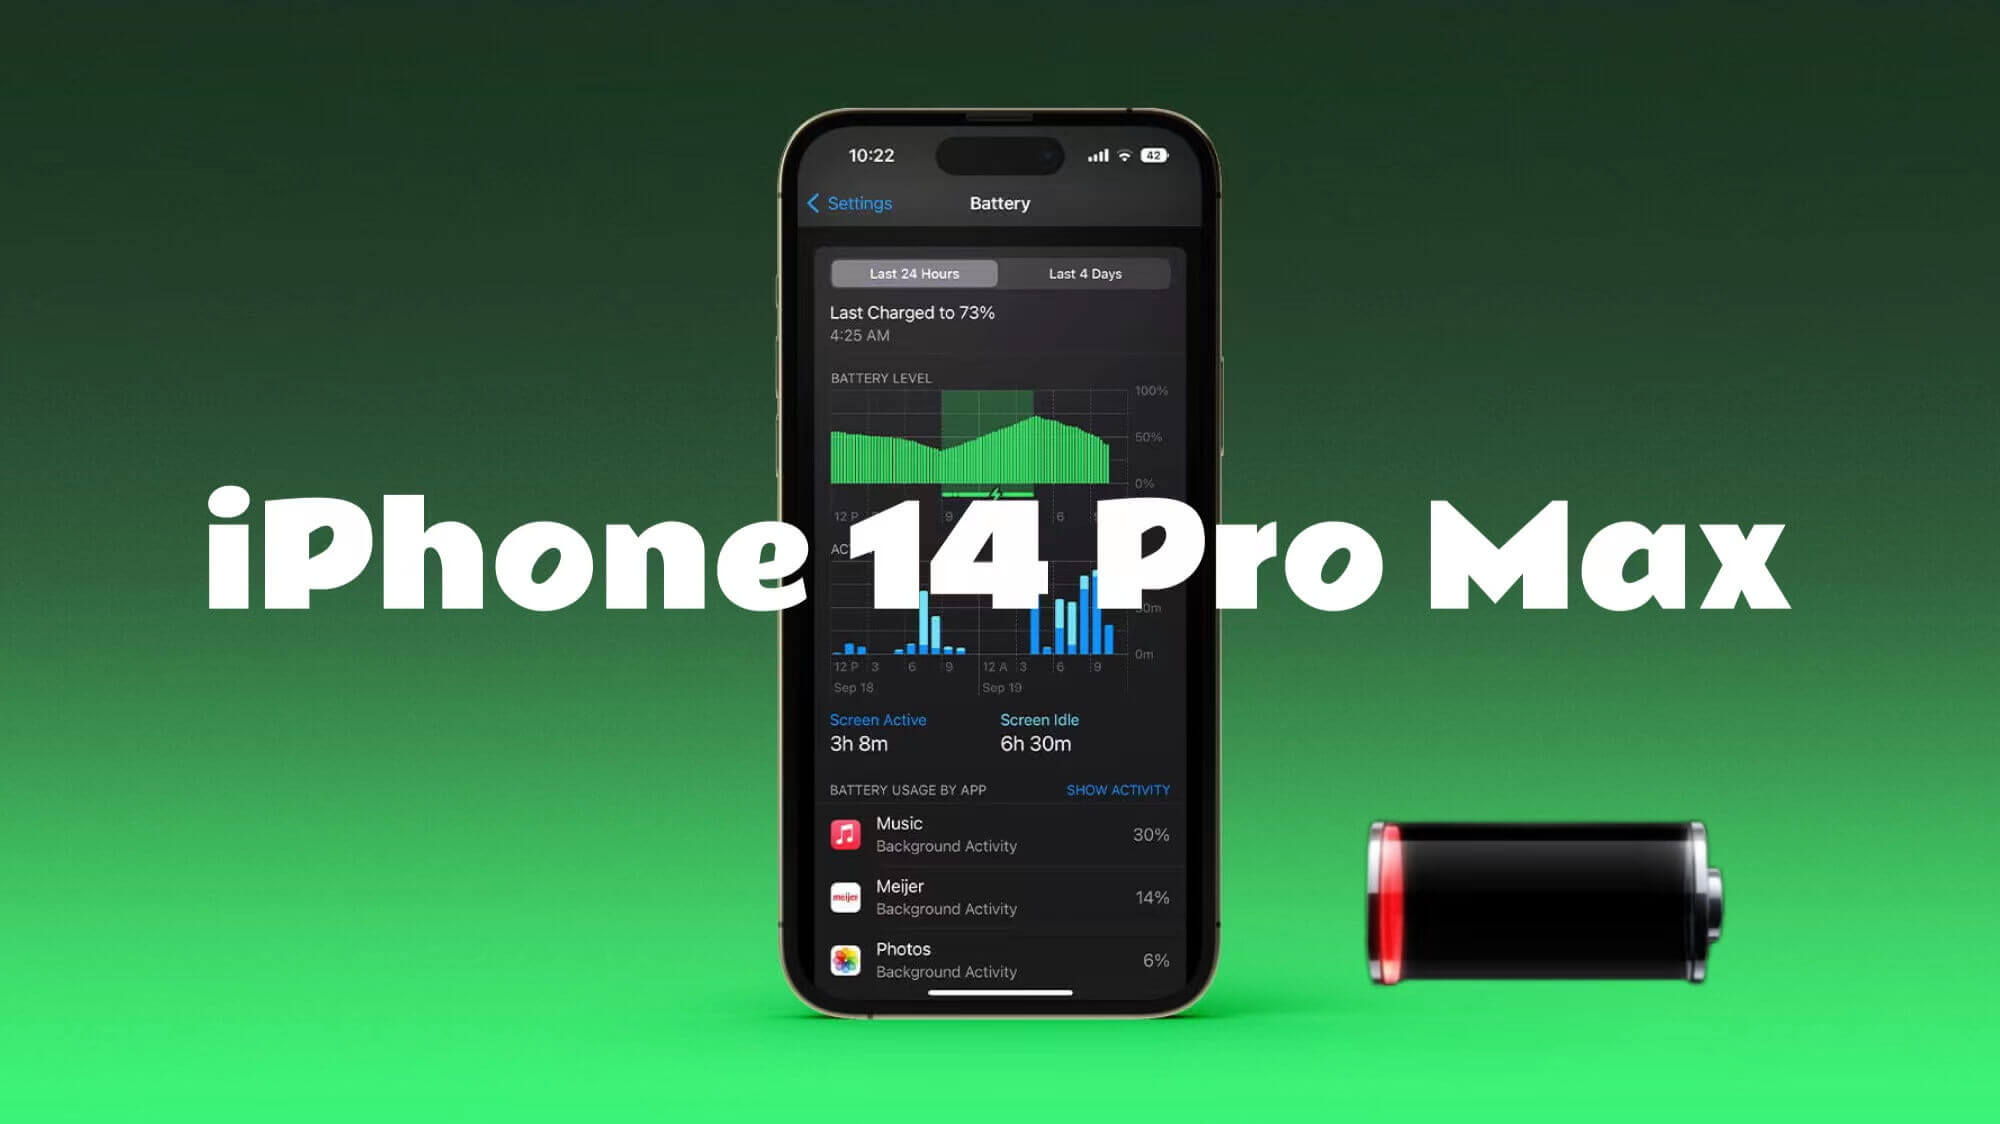 iPhone 14 Pro Max battery